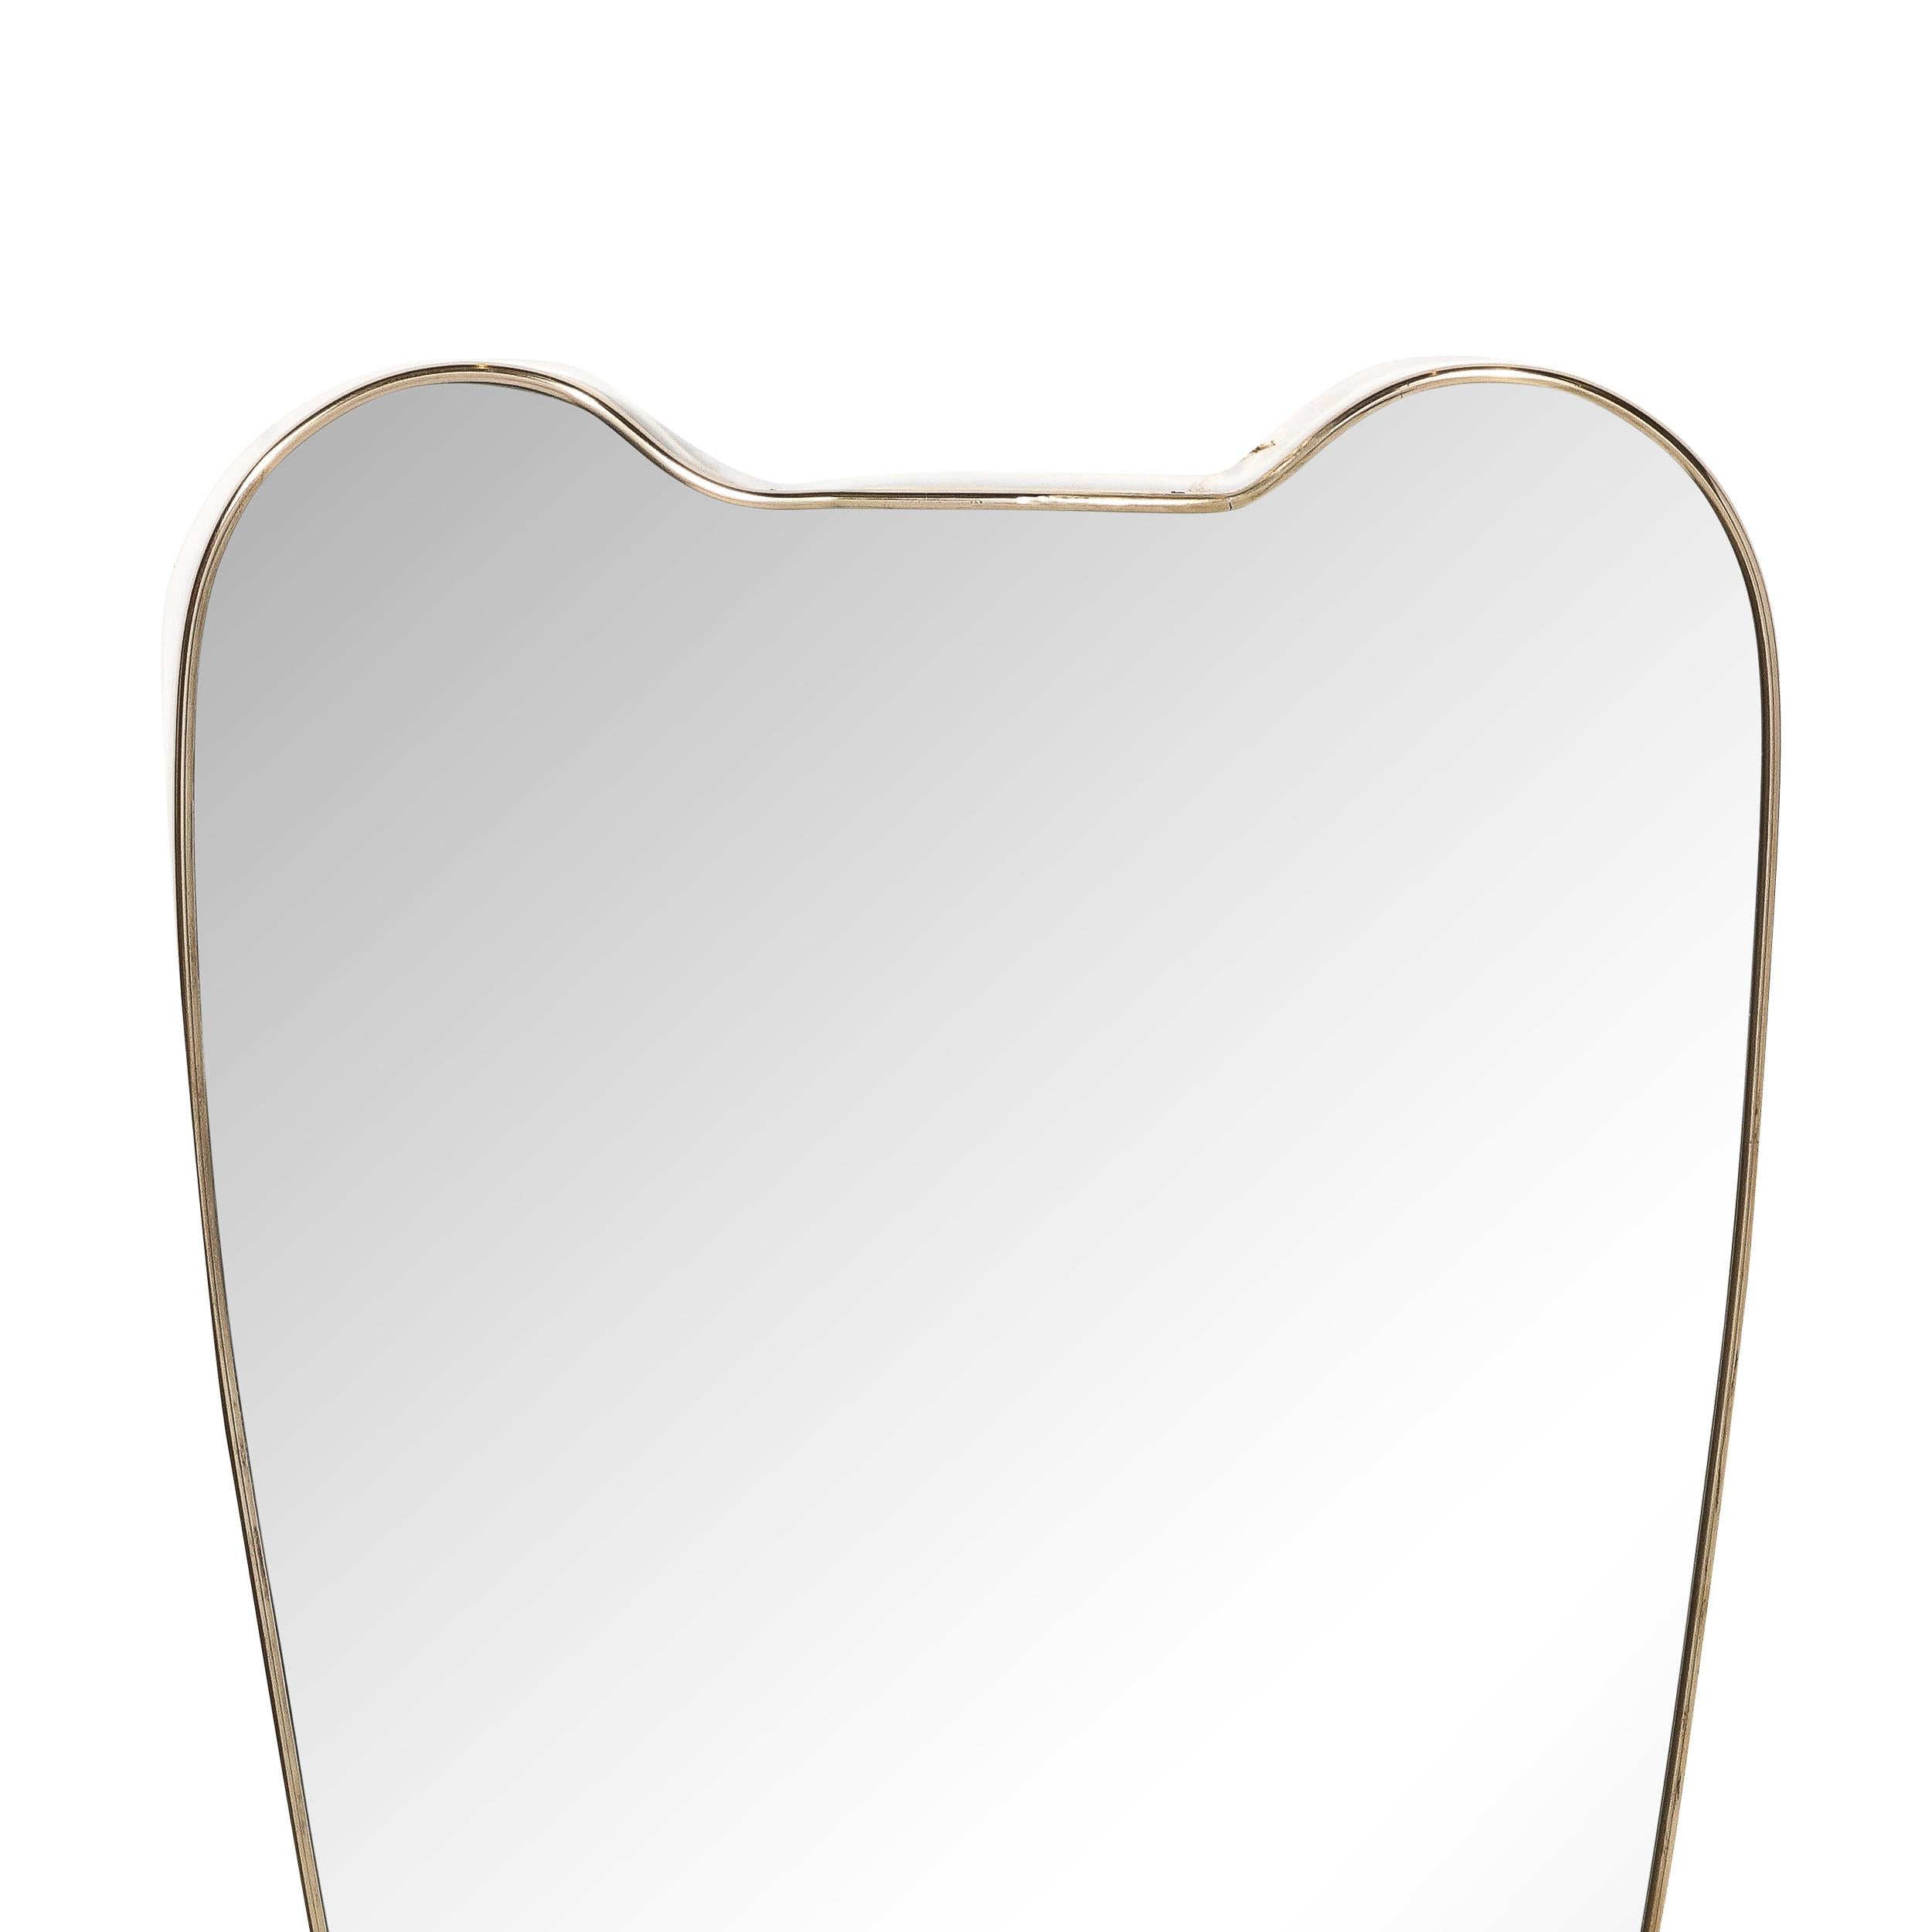 Italian Mid-Century Modernist Brass Wrapped Shield Form Mirror For Sale